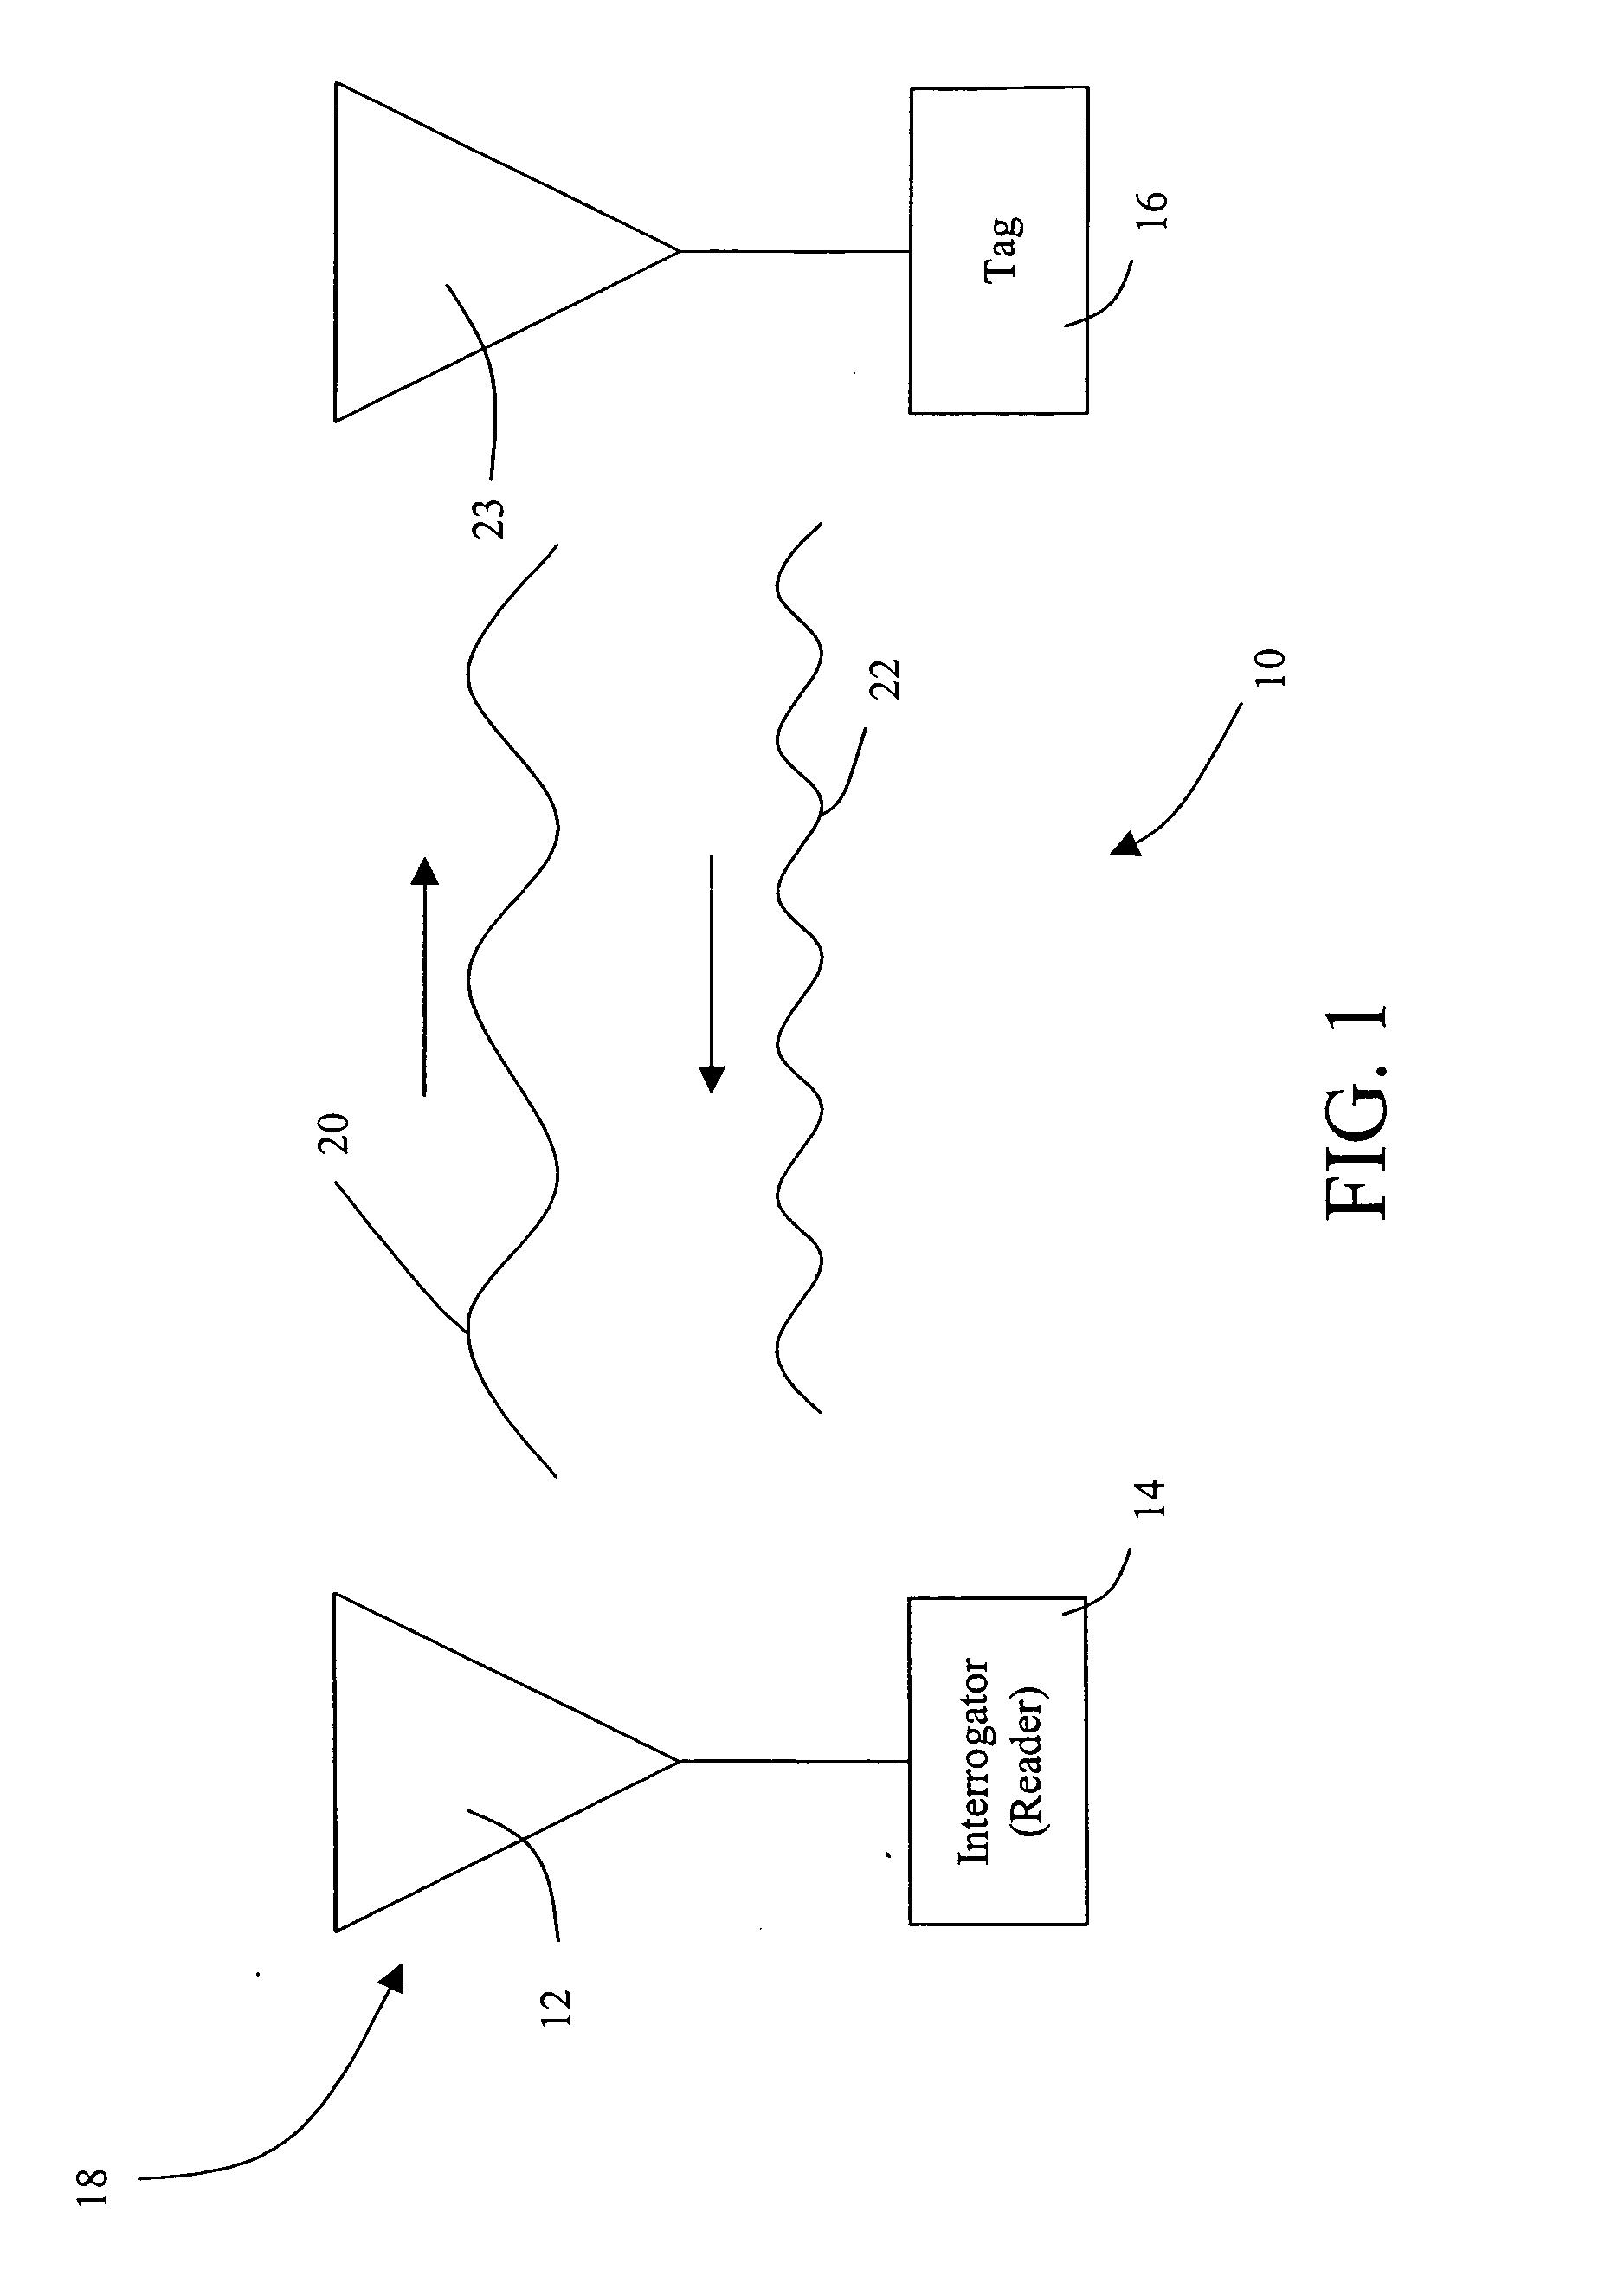 System and method for optimizing power usage in a radio frequency communication device